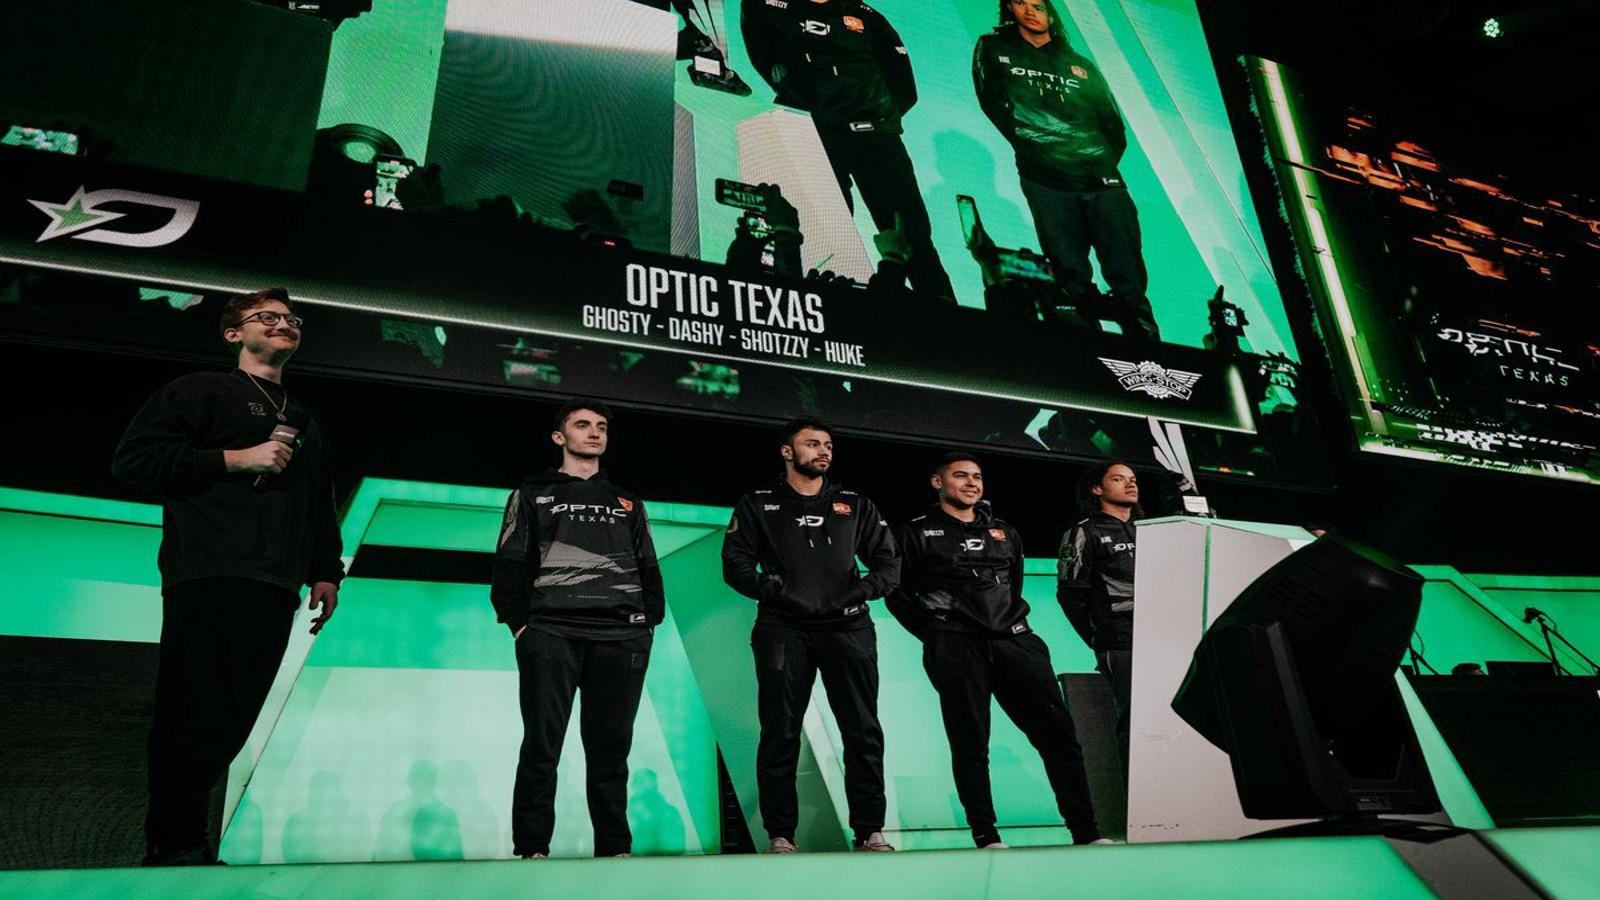 OpTic Texas is bringing back its entire Call of Duty League roster